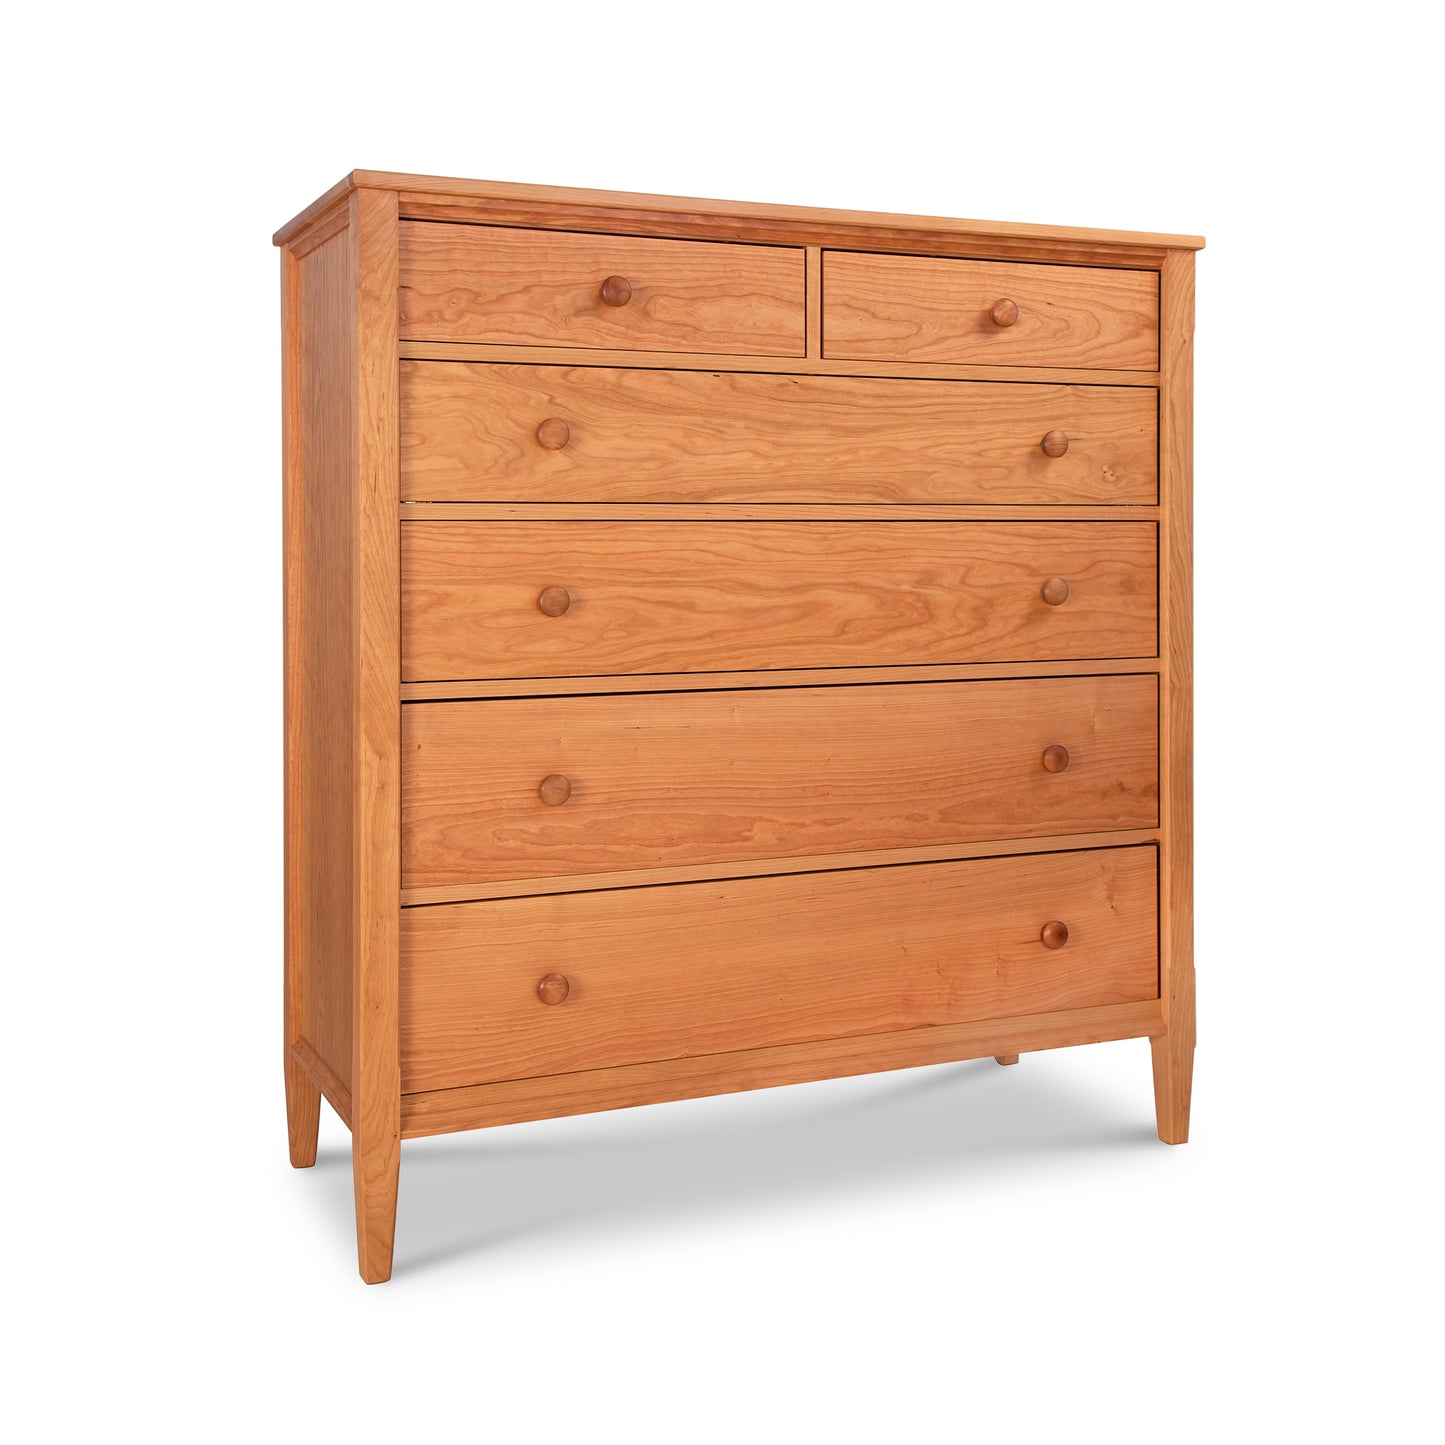 An Vermont Shaker Extra Wide Chest of drawers on a white background from Maple Corner Woodworks.